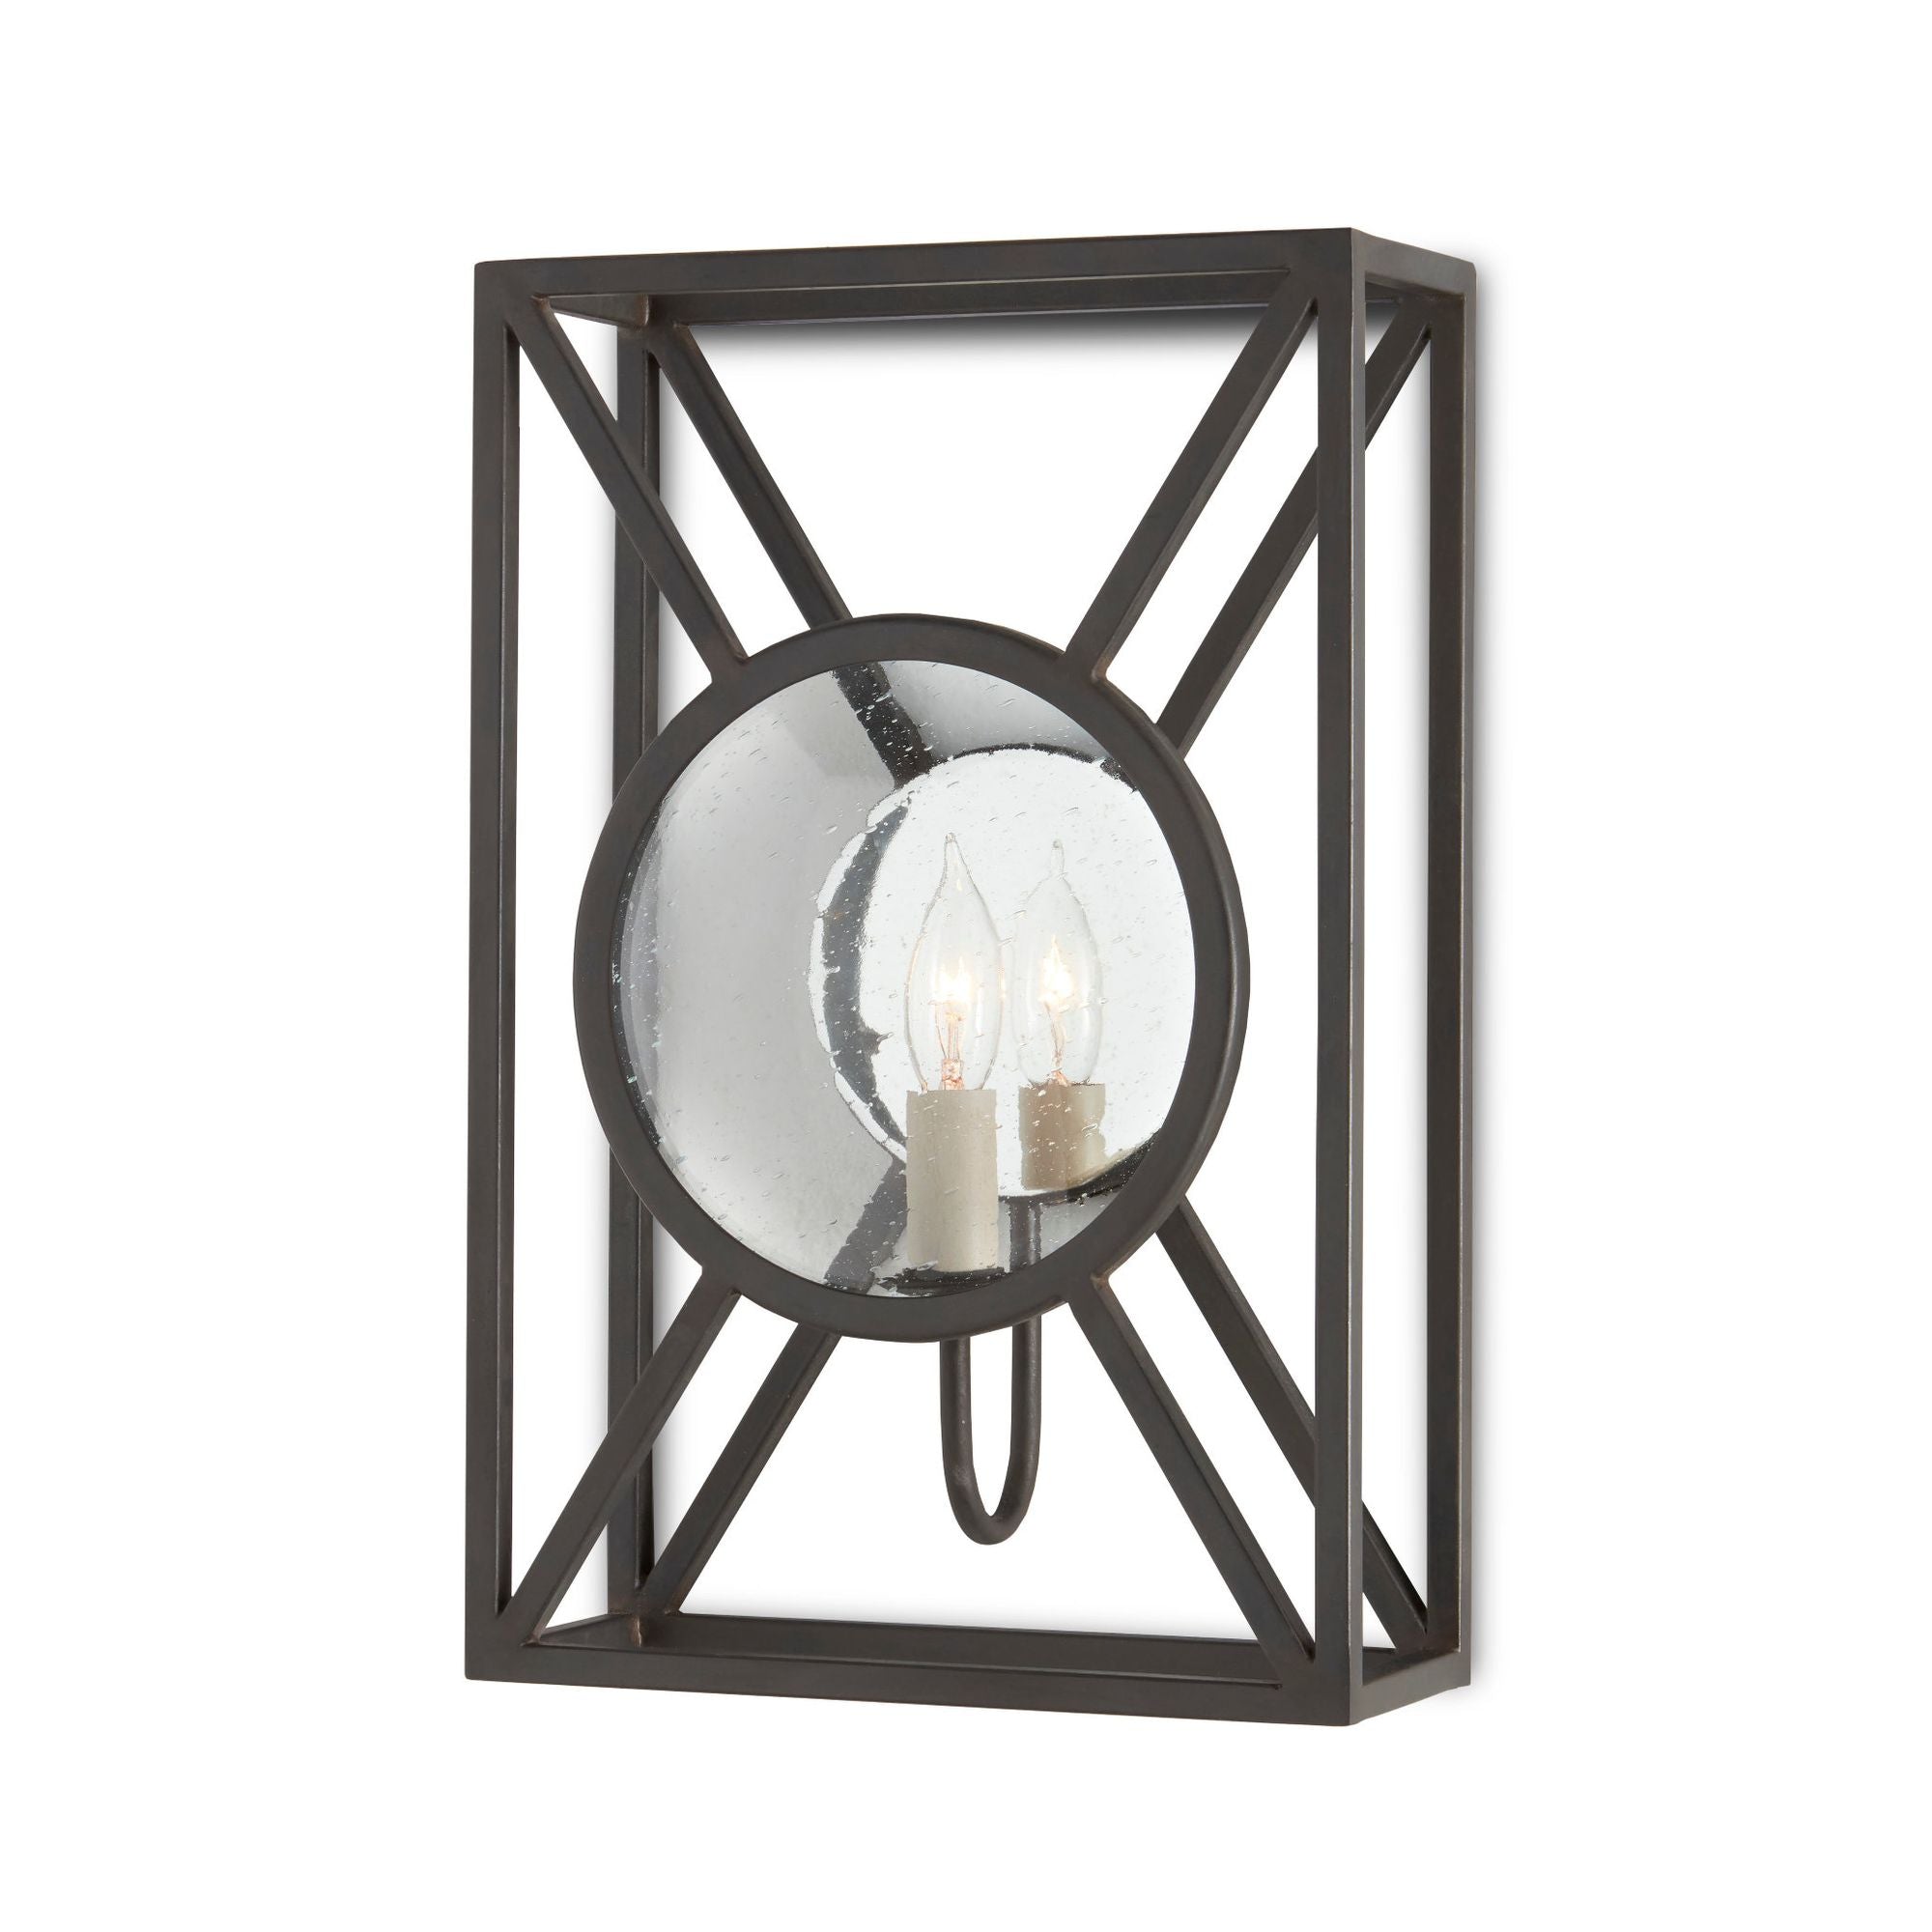 Beckmore Black Wall Sconce - Old Iron